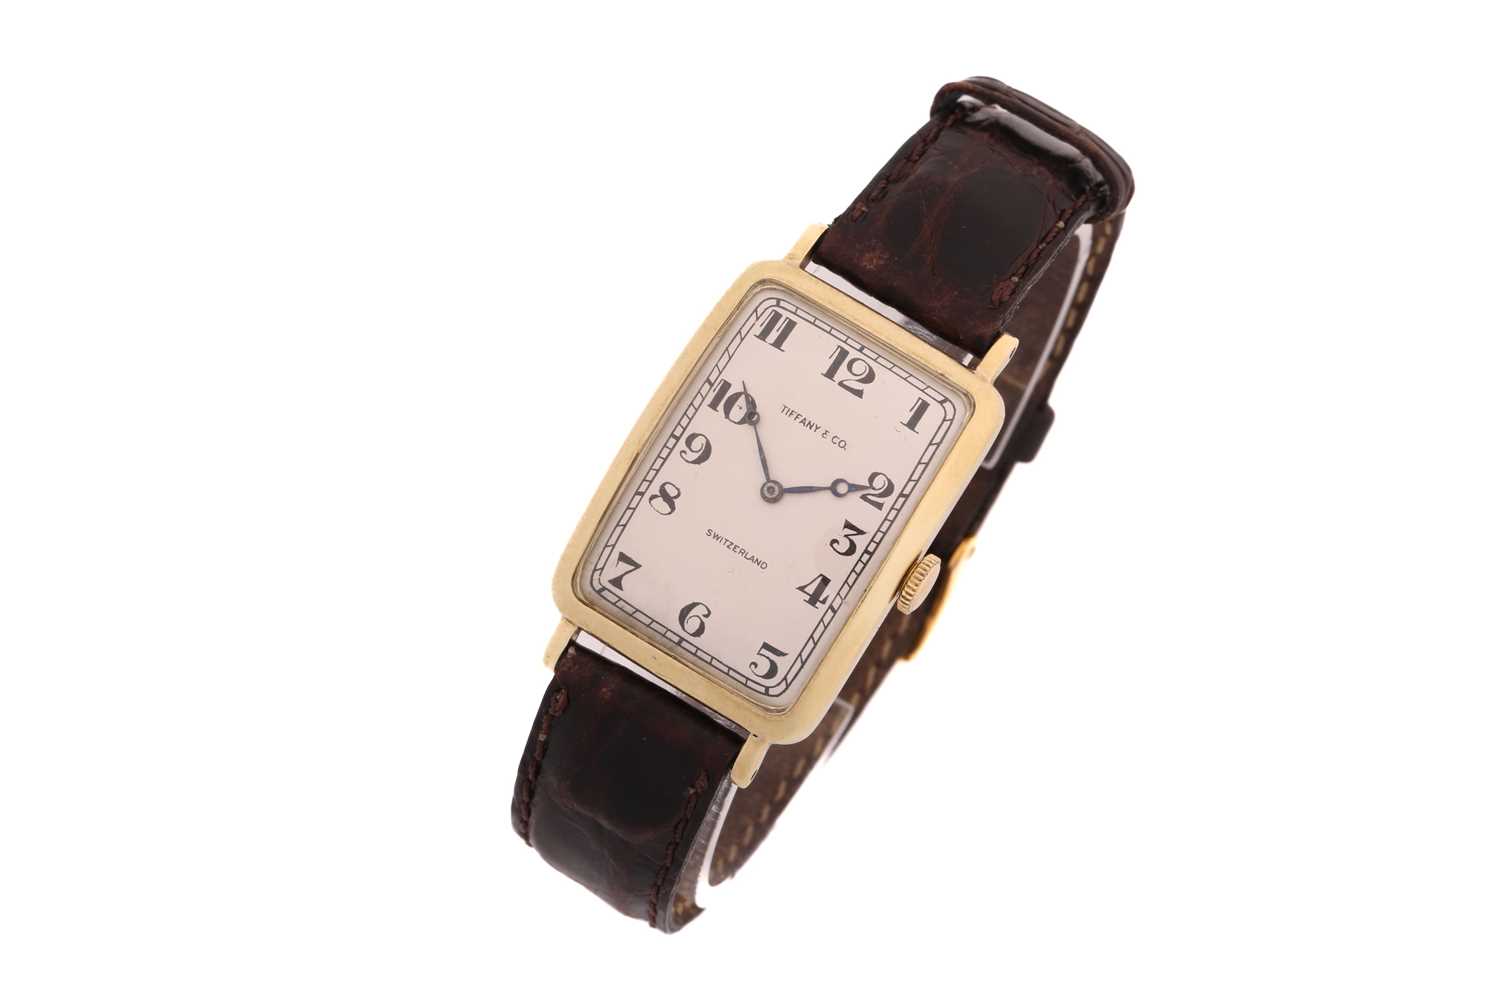 A Gentlemen's Tiffany and Co. wristwatch with a Longines watch co. hand-wound Swiss-made movement in